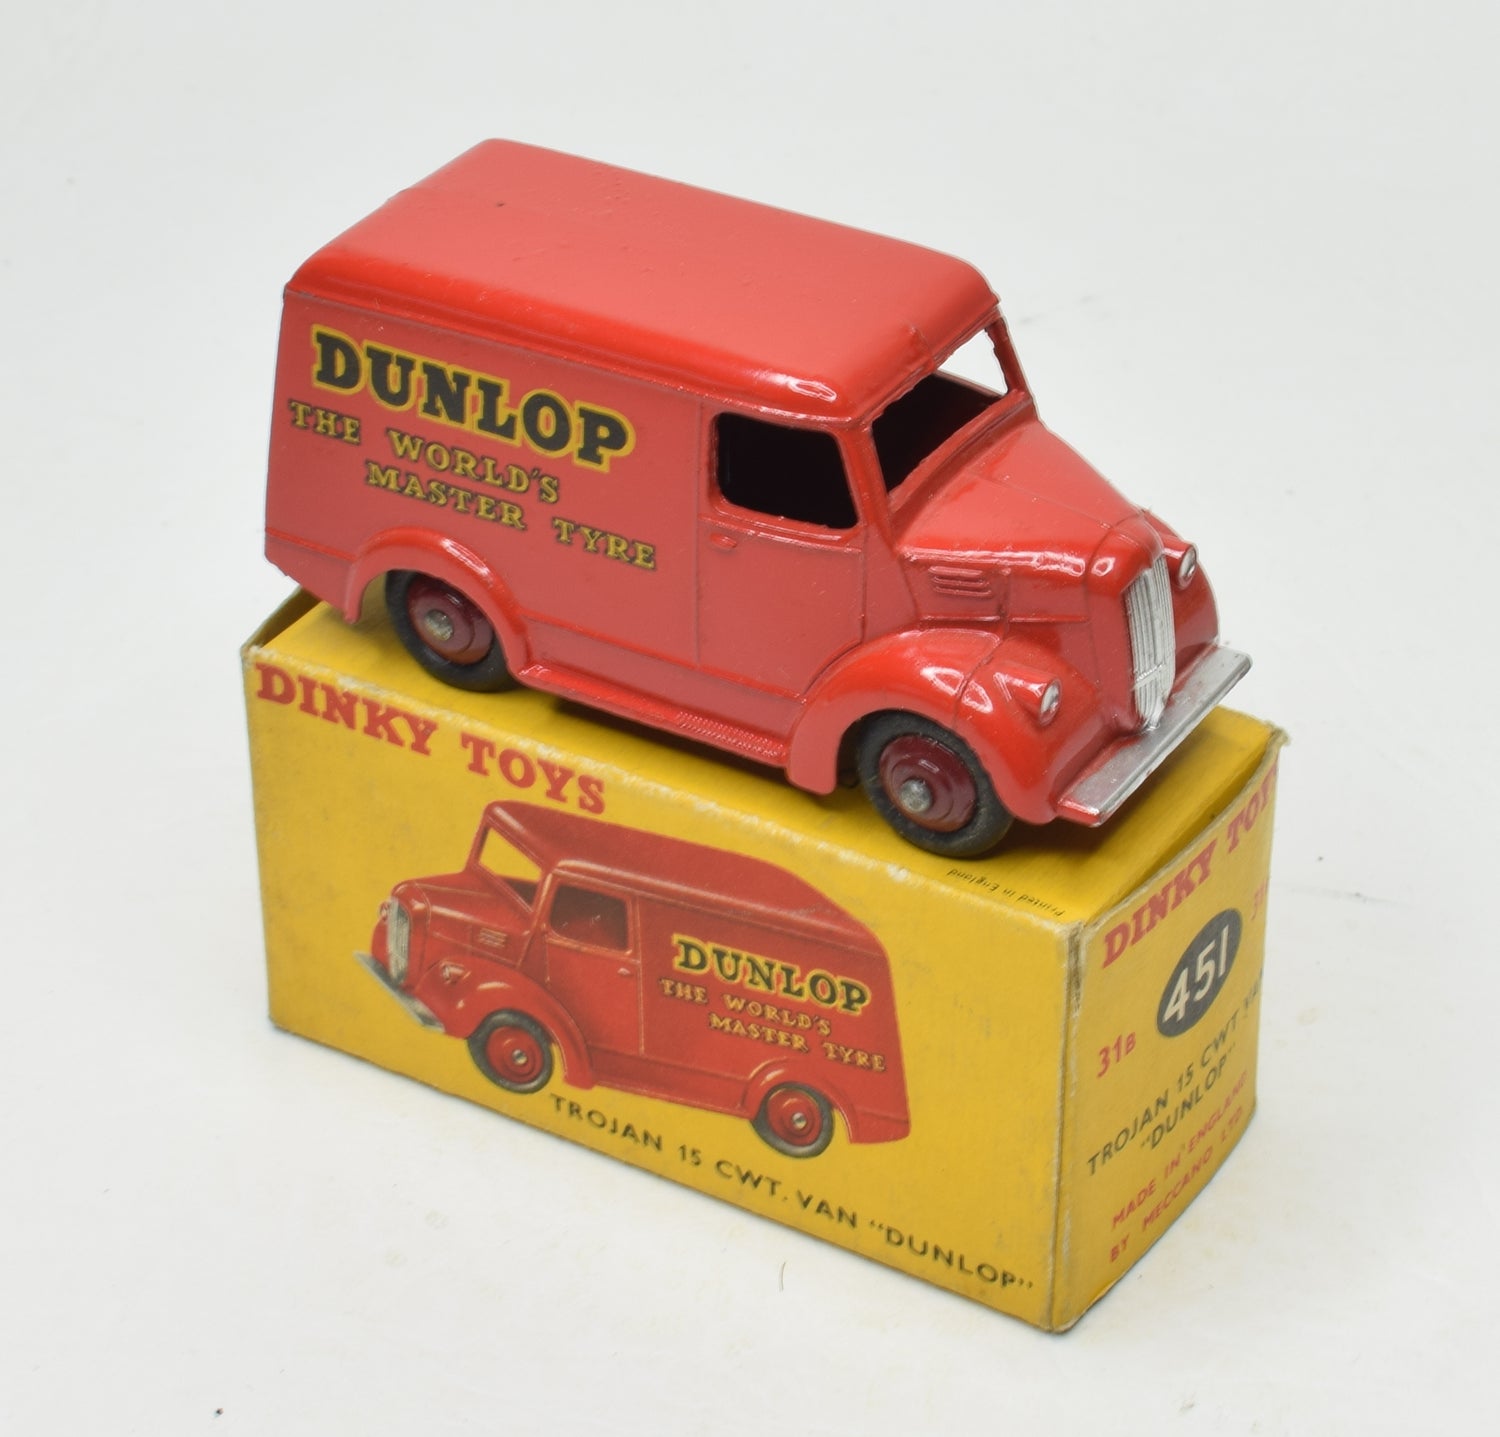 Dinky toys 451/31B 'Dunlop' Trojan Virtually Mint/Boxed 'Brecon ' Collection Part 2